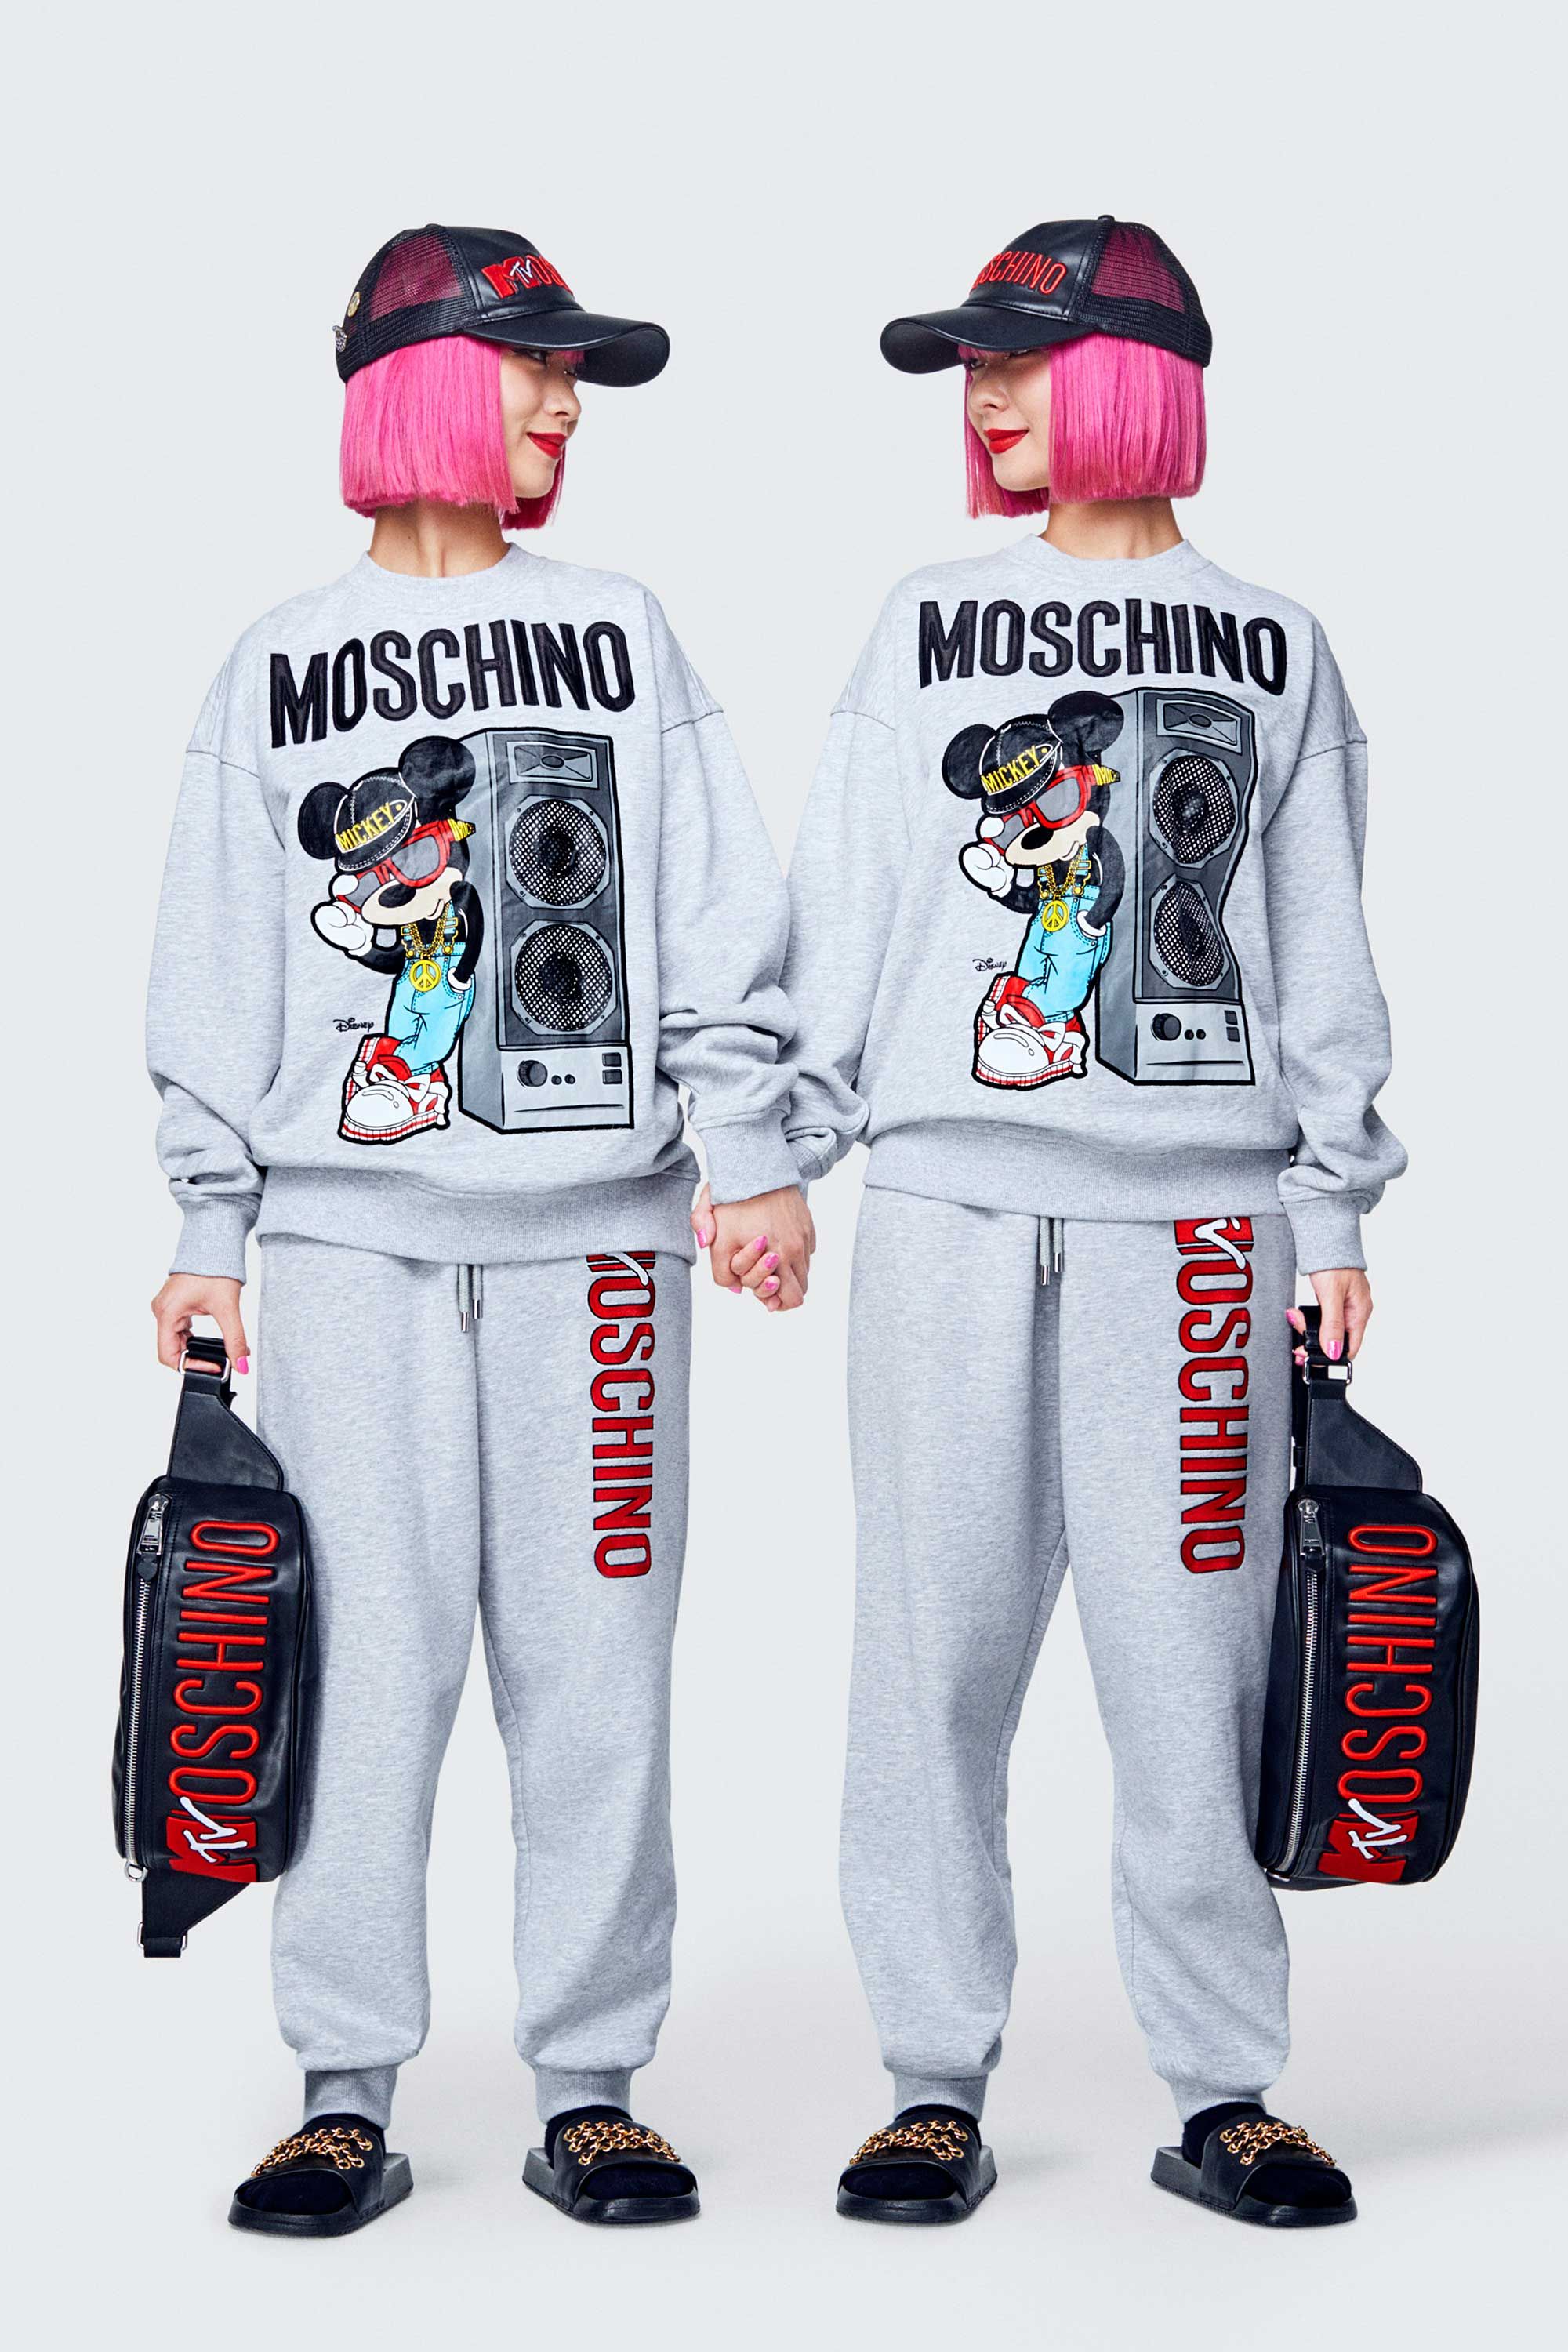 Moschino for H&M collaboration pictures: 13 looks you need to see